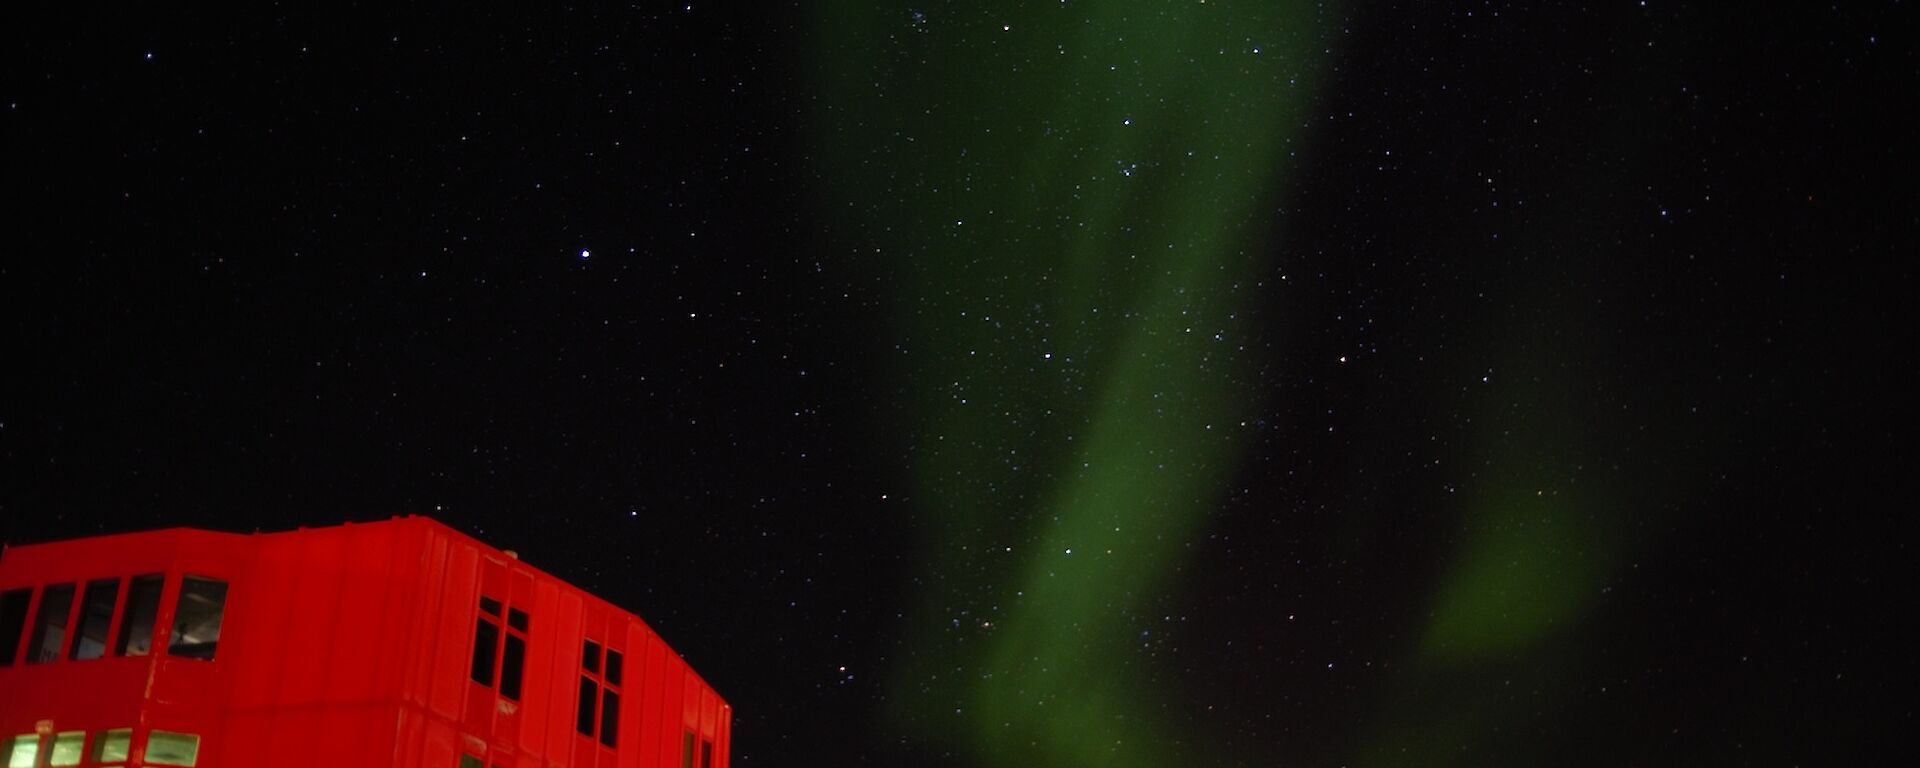 Another spectacular Mawson aurora over the iconic Red Shed.